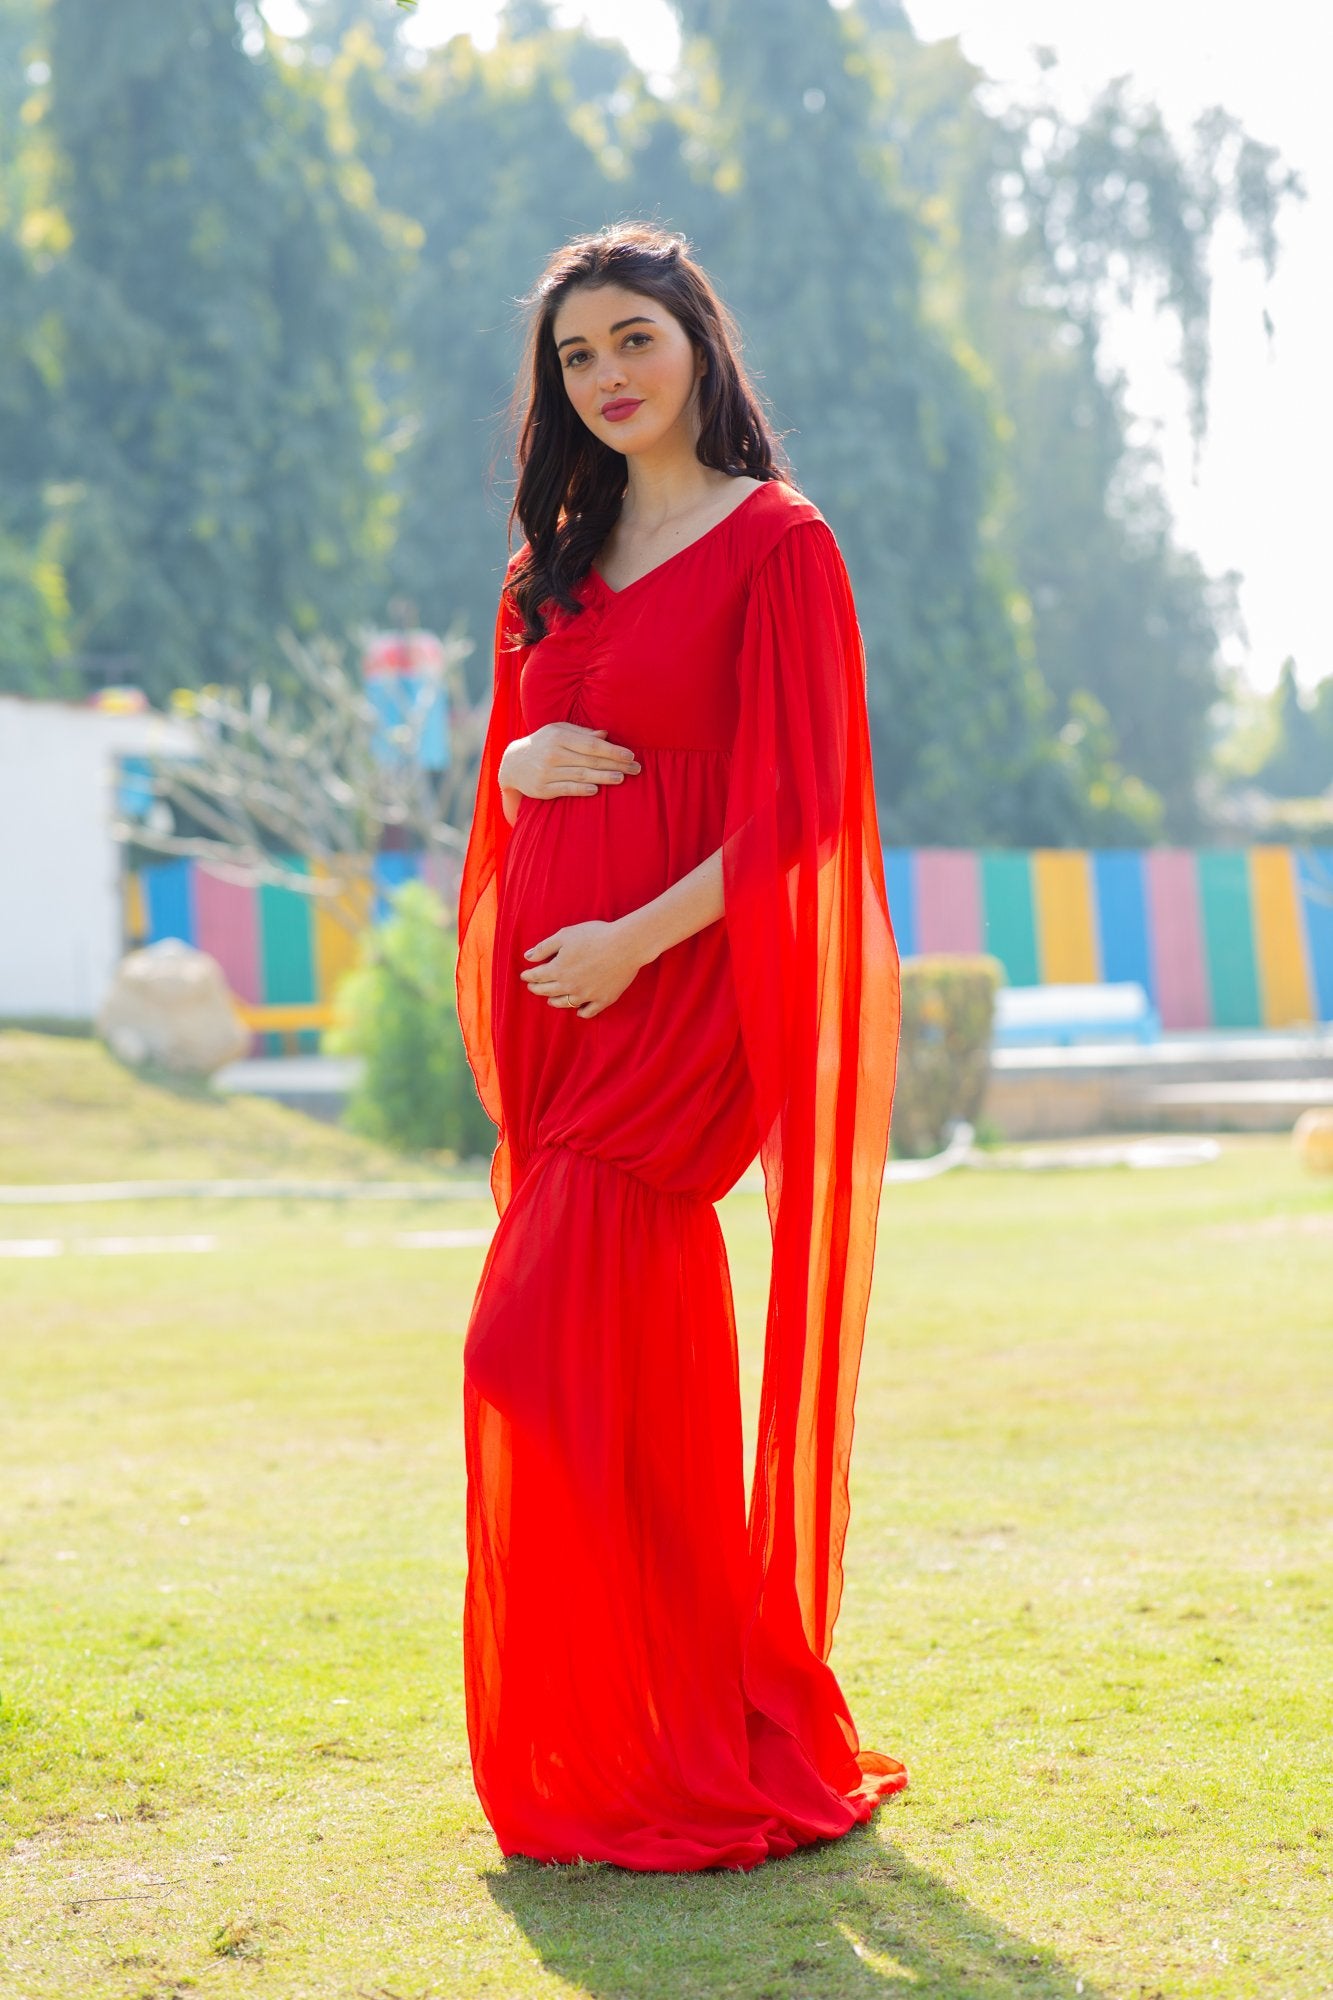 Faithful Photography - 9 Outfit Ideas For Your Home Maternity Shoot in 2023  - Your Family & Newborn Photography Specialists